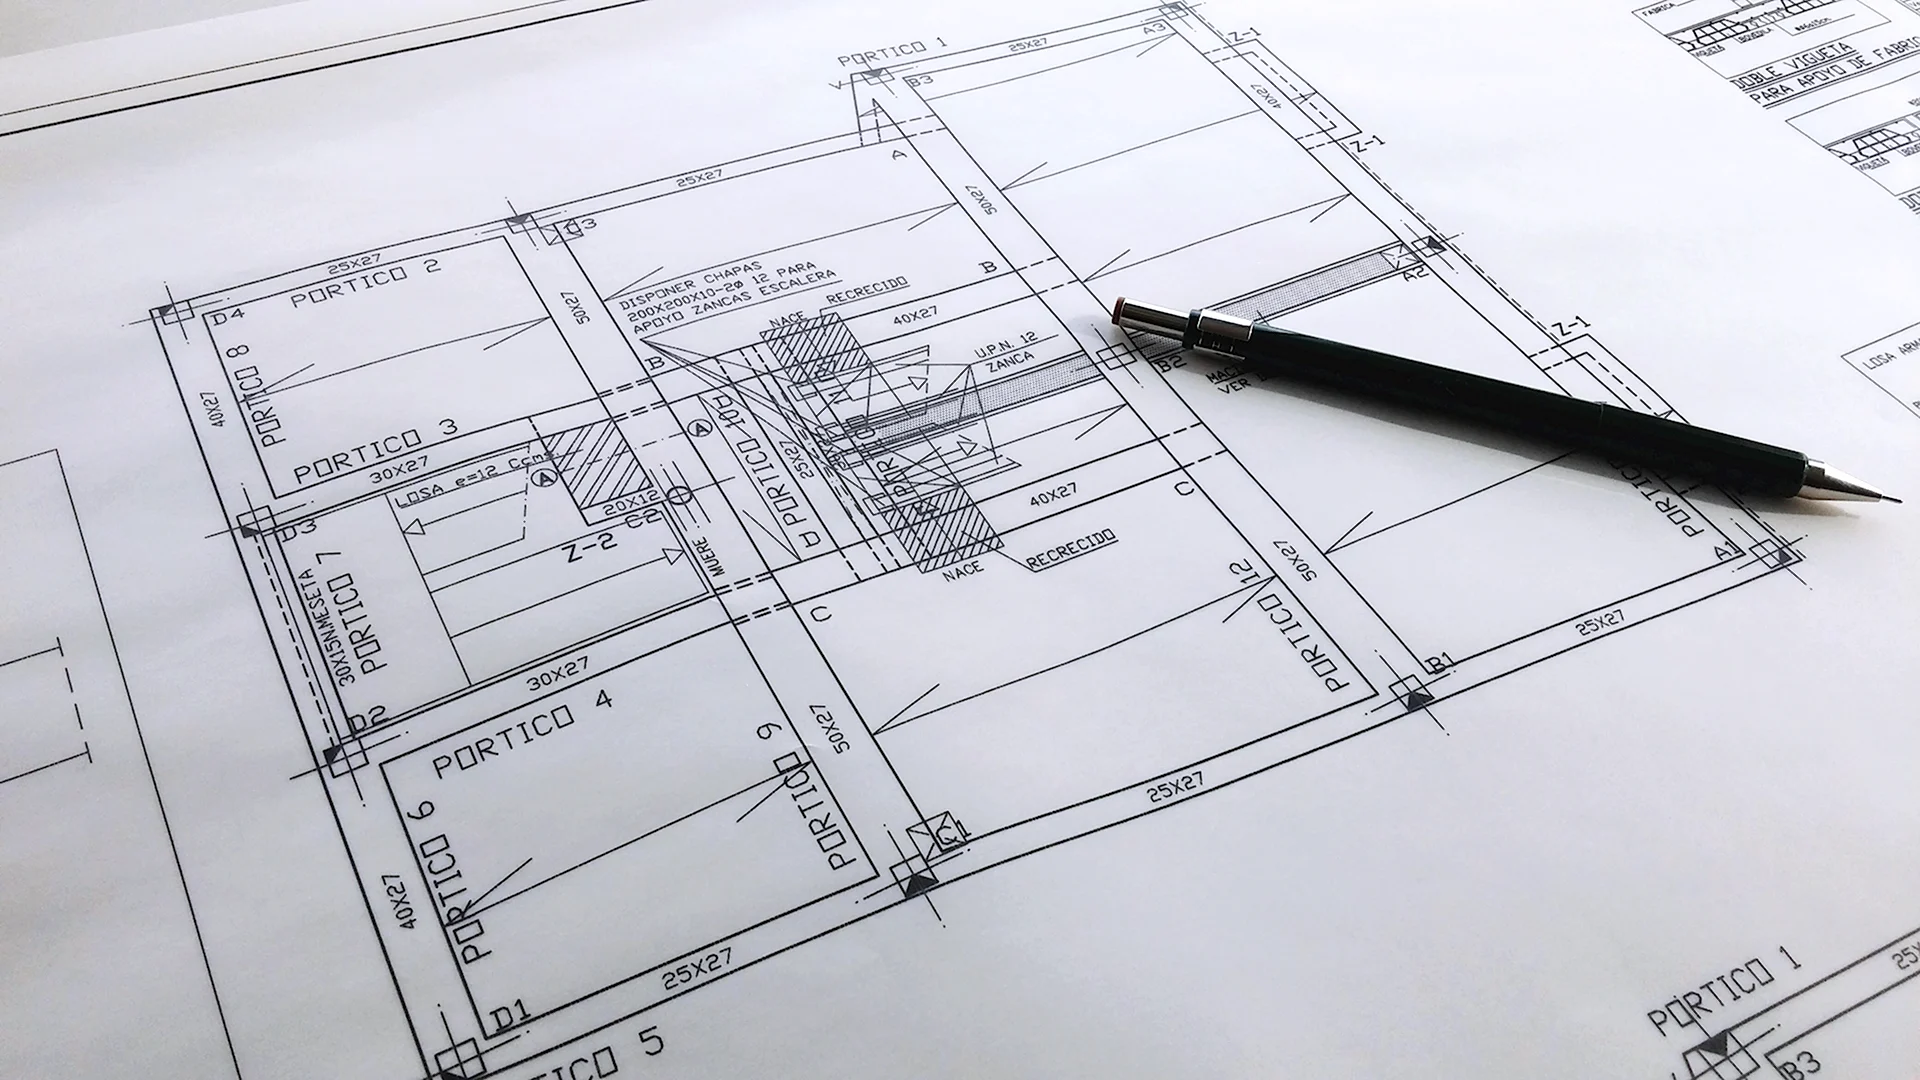 Architect drawing on a Blueprint